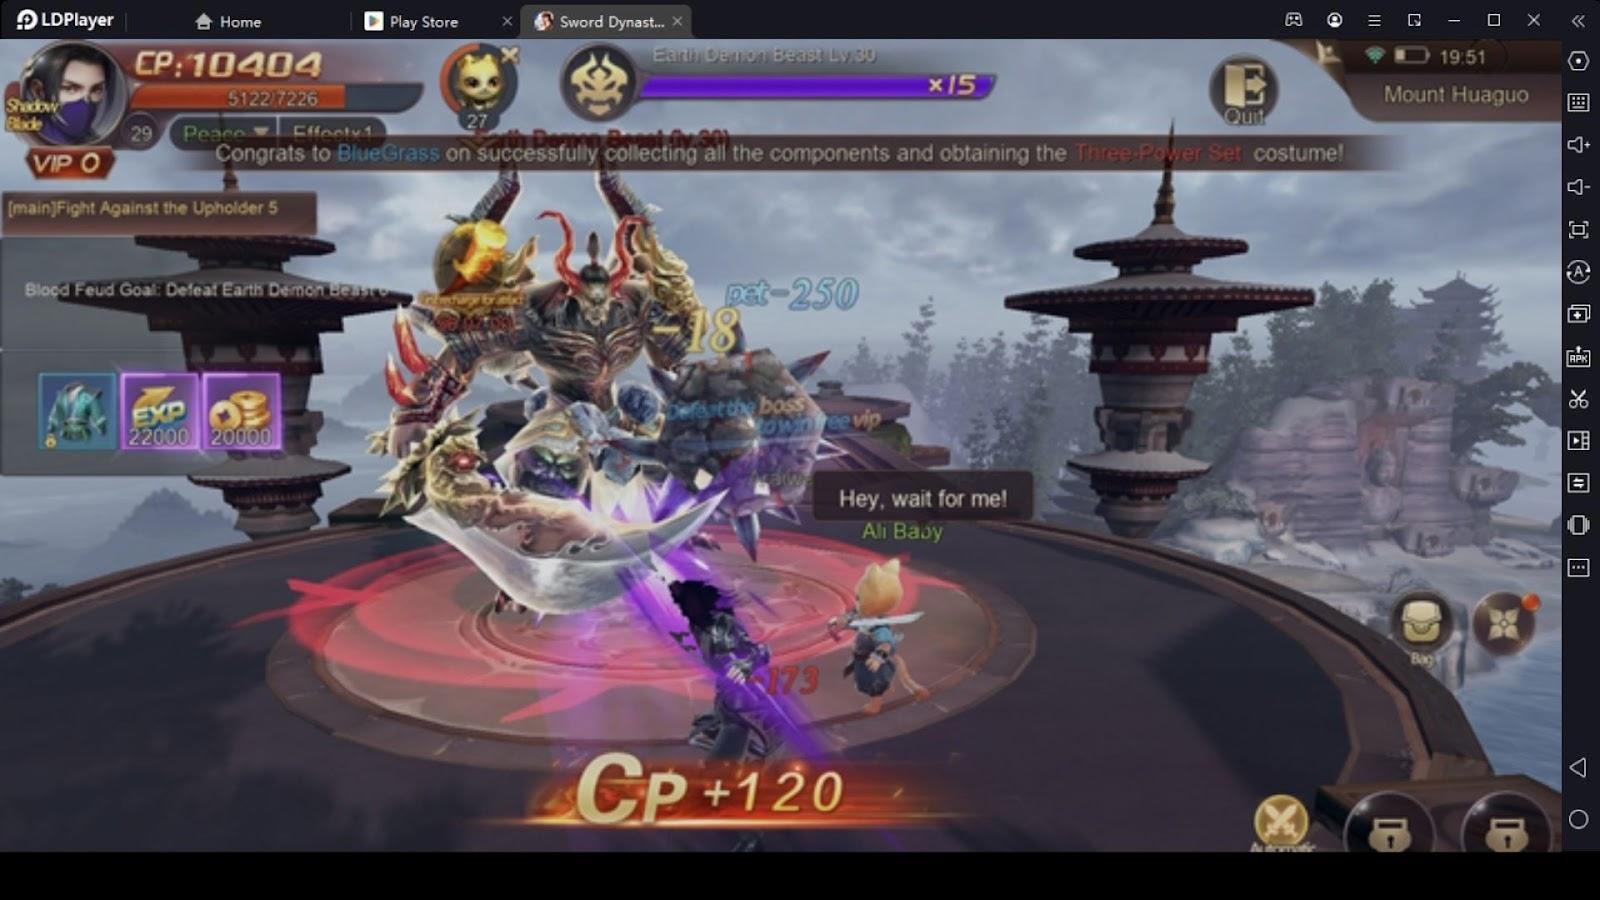 How to Play Sword Dynasty: Immortal on Your PC